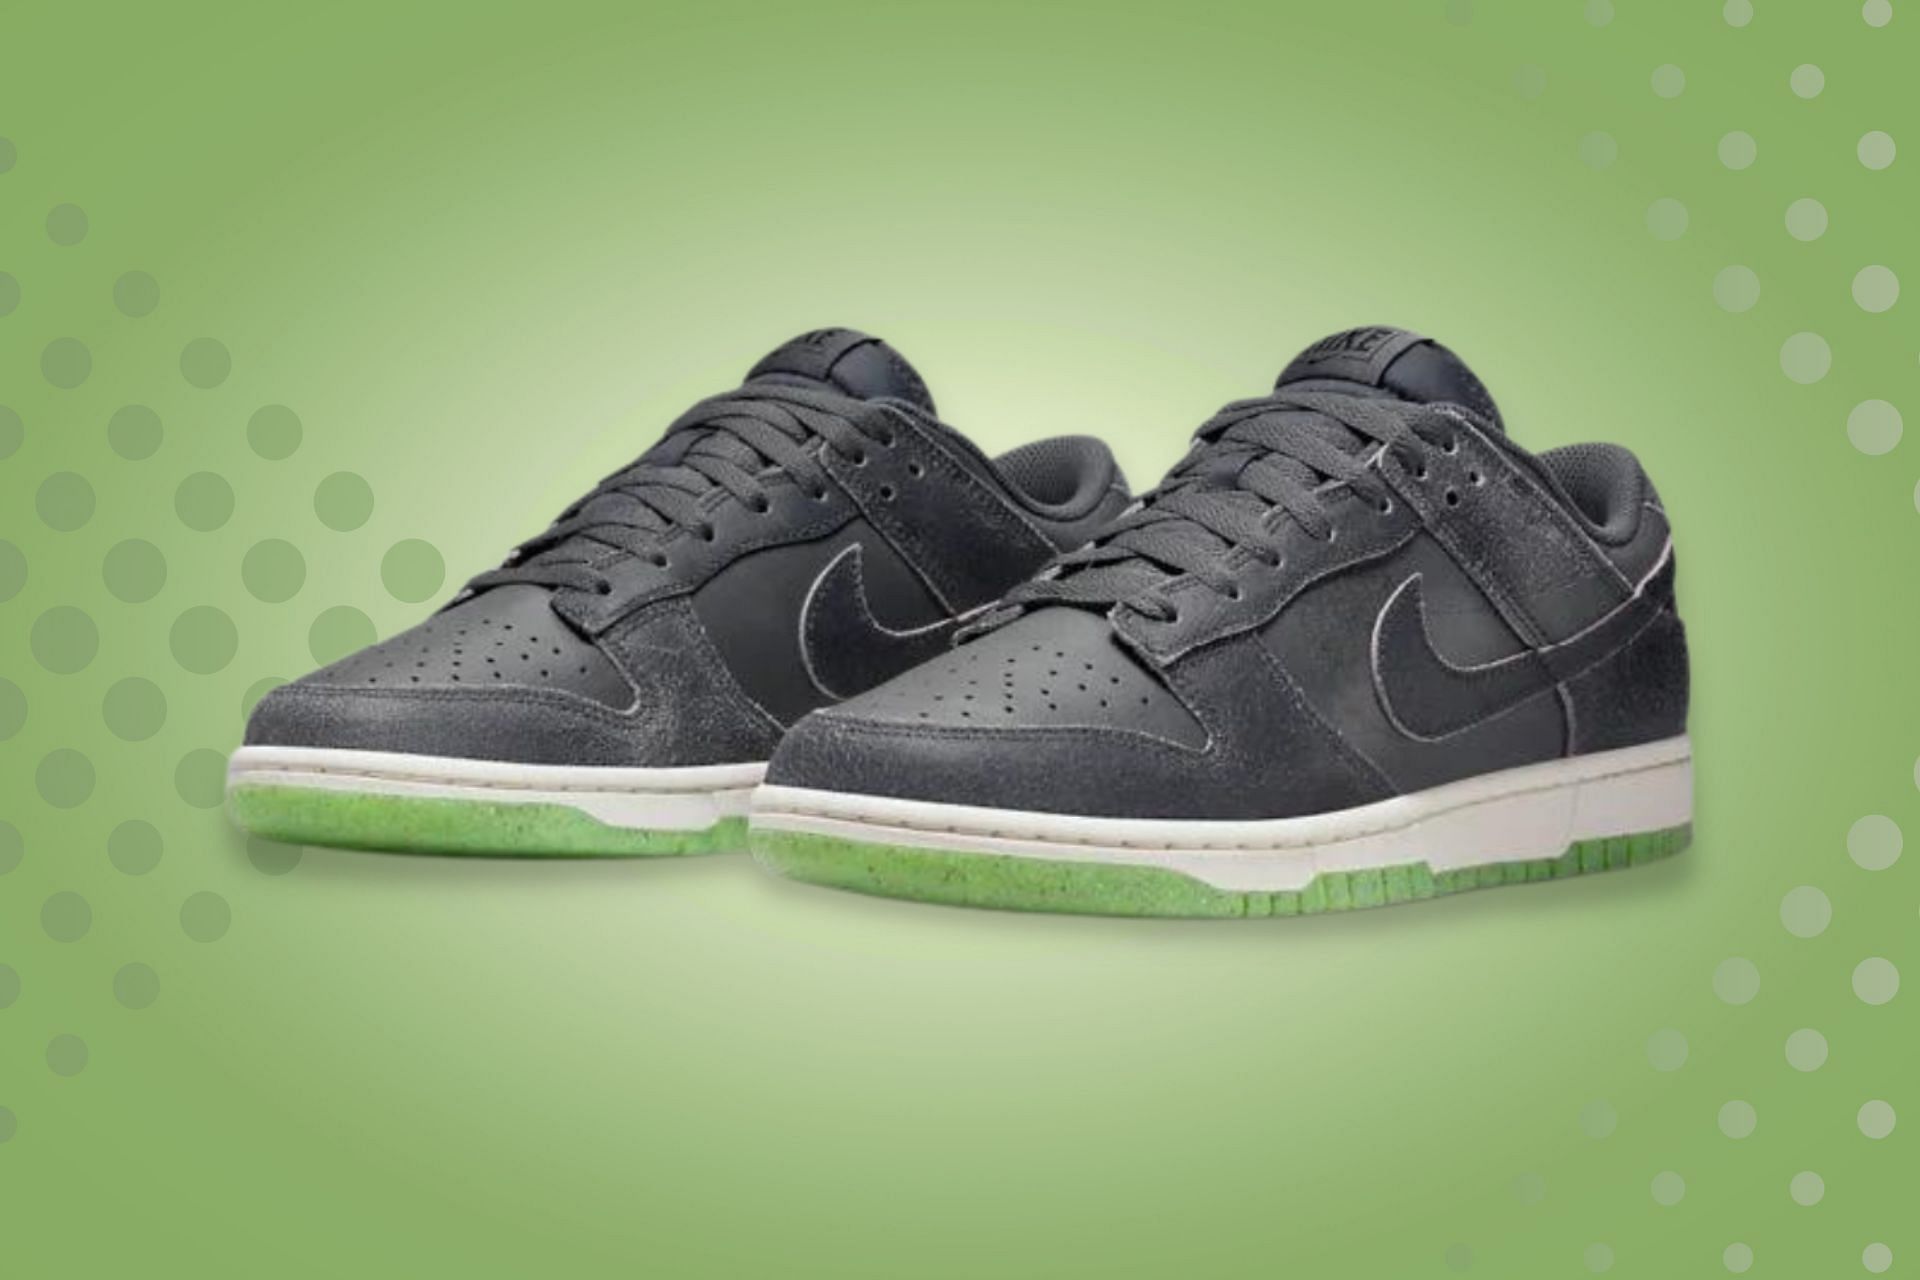 Where roger federer nike shoes to buy Nike Dunk Low “Halloween” shoes? Price, release date